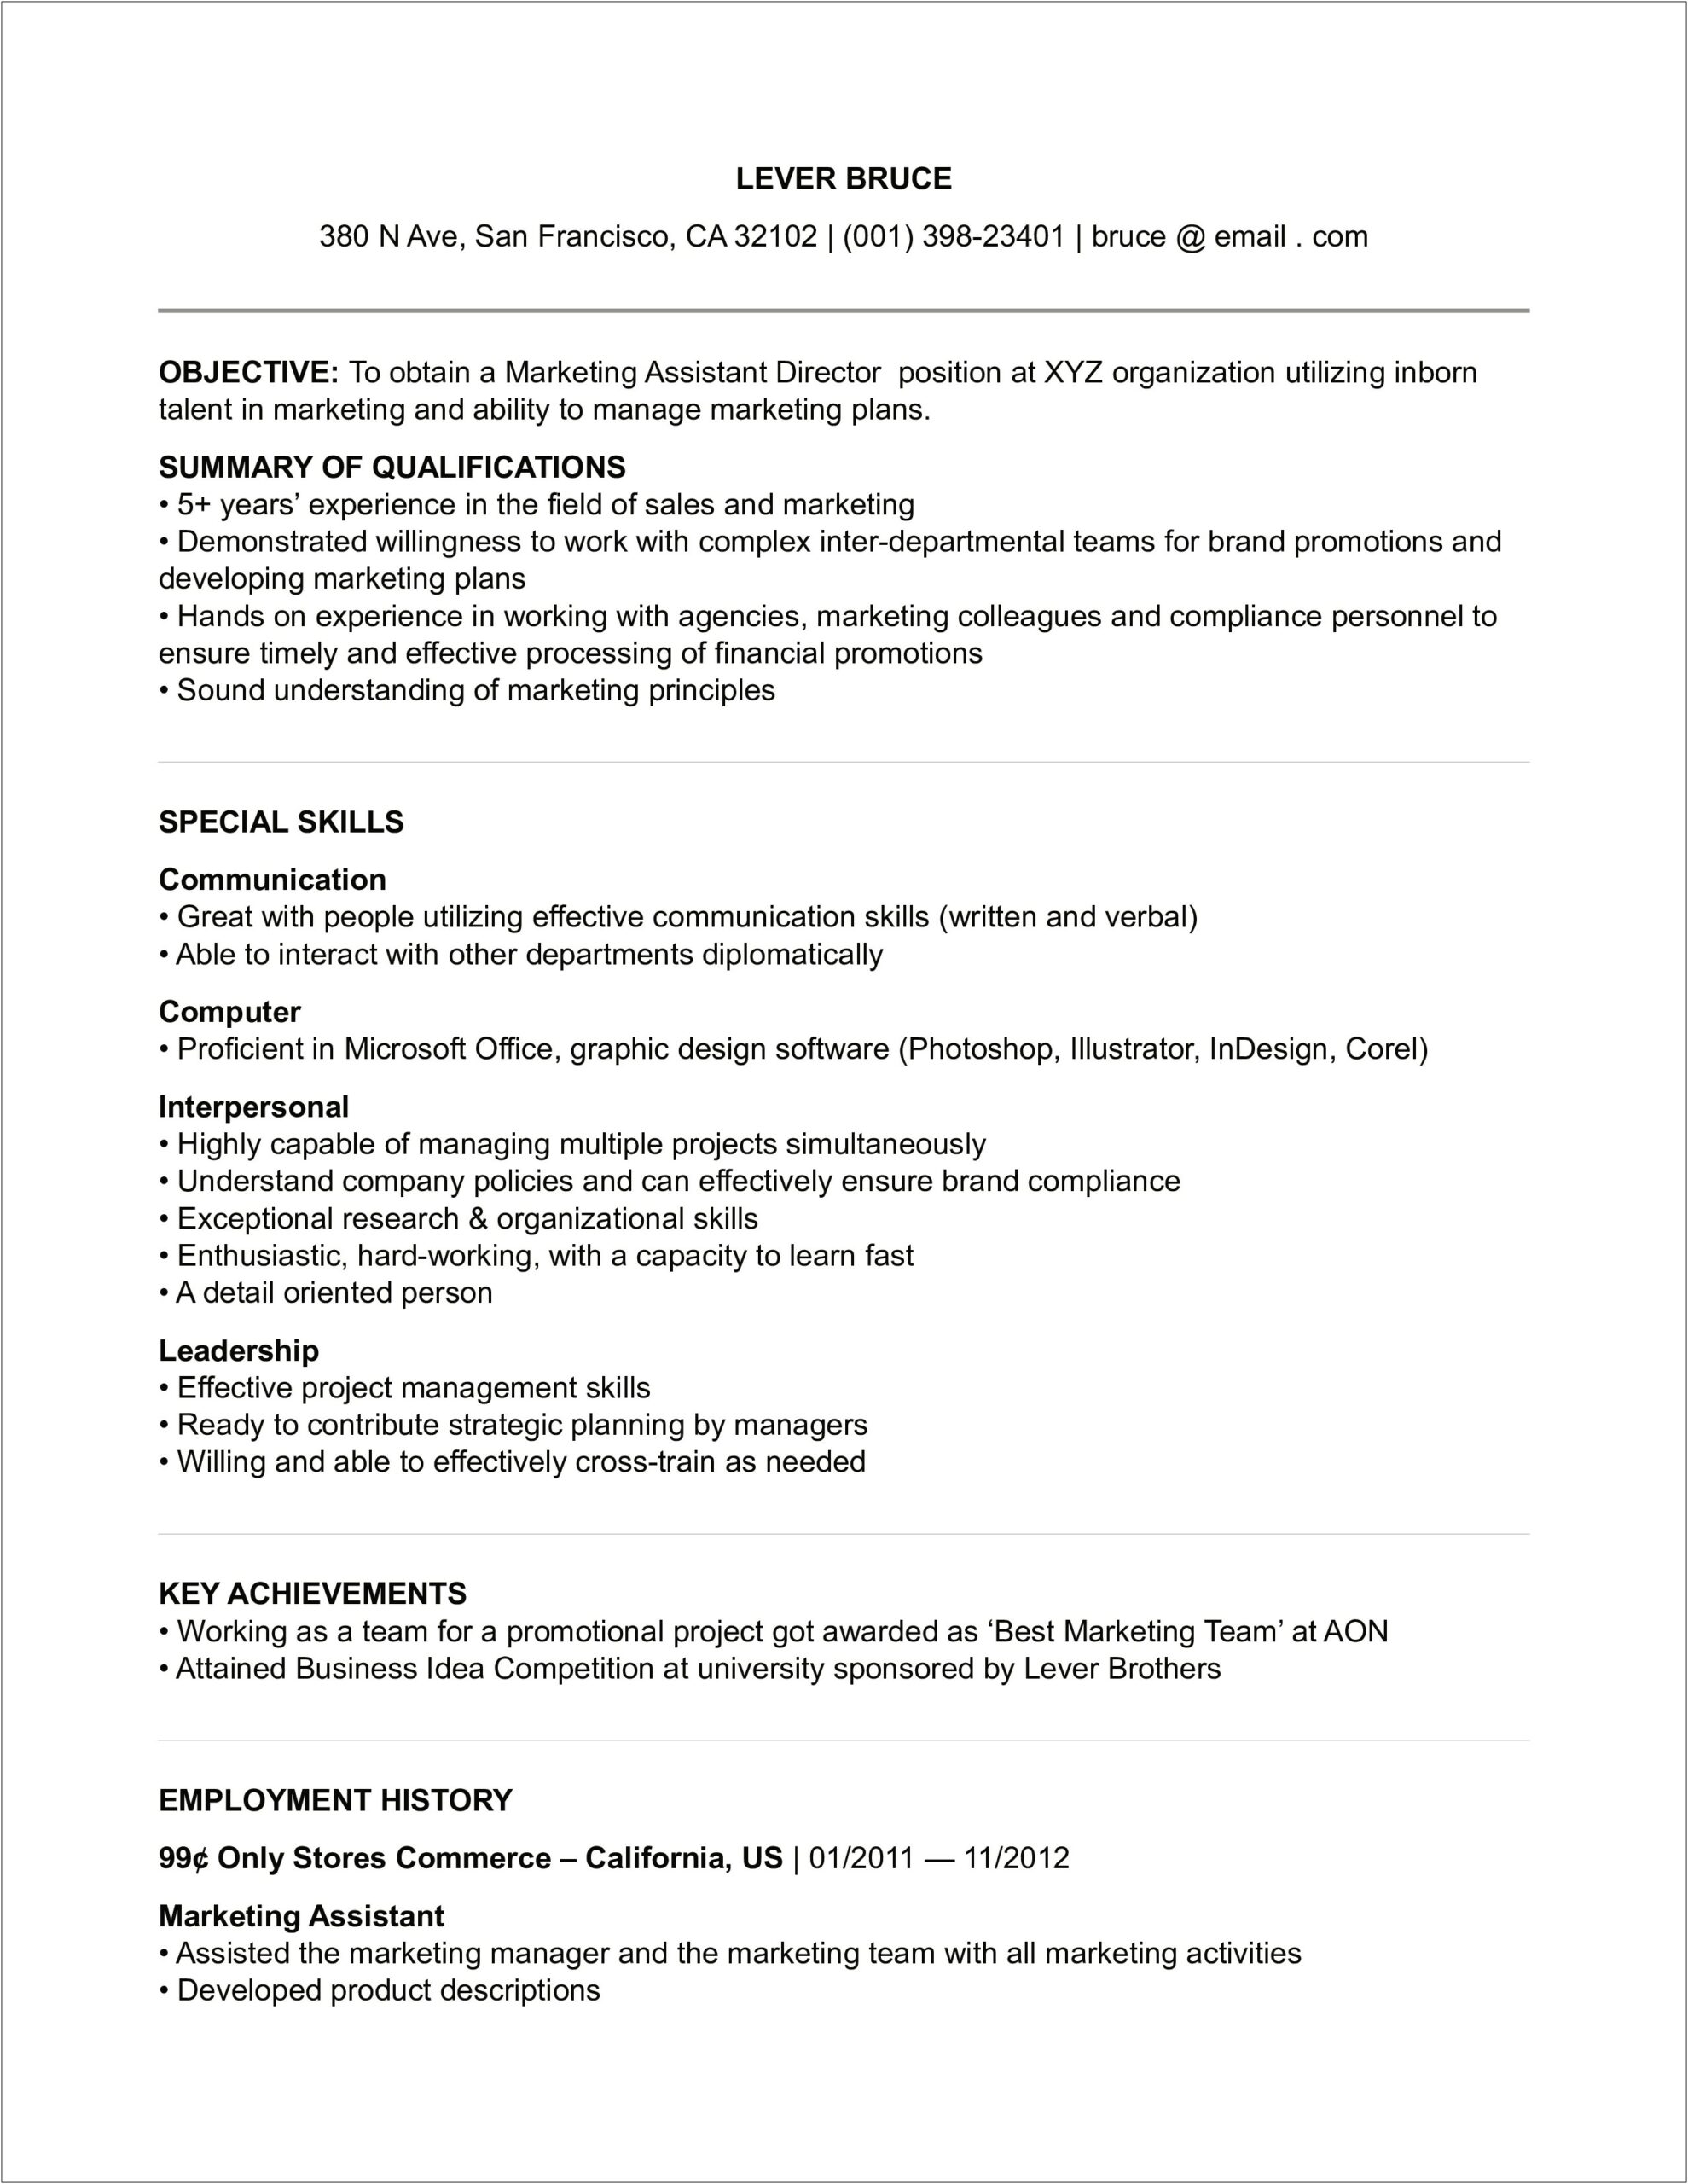 Resume Photoshop Template For Childcare Assistant